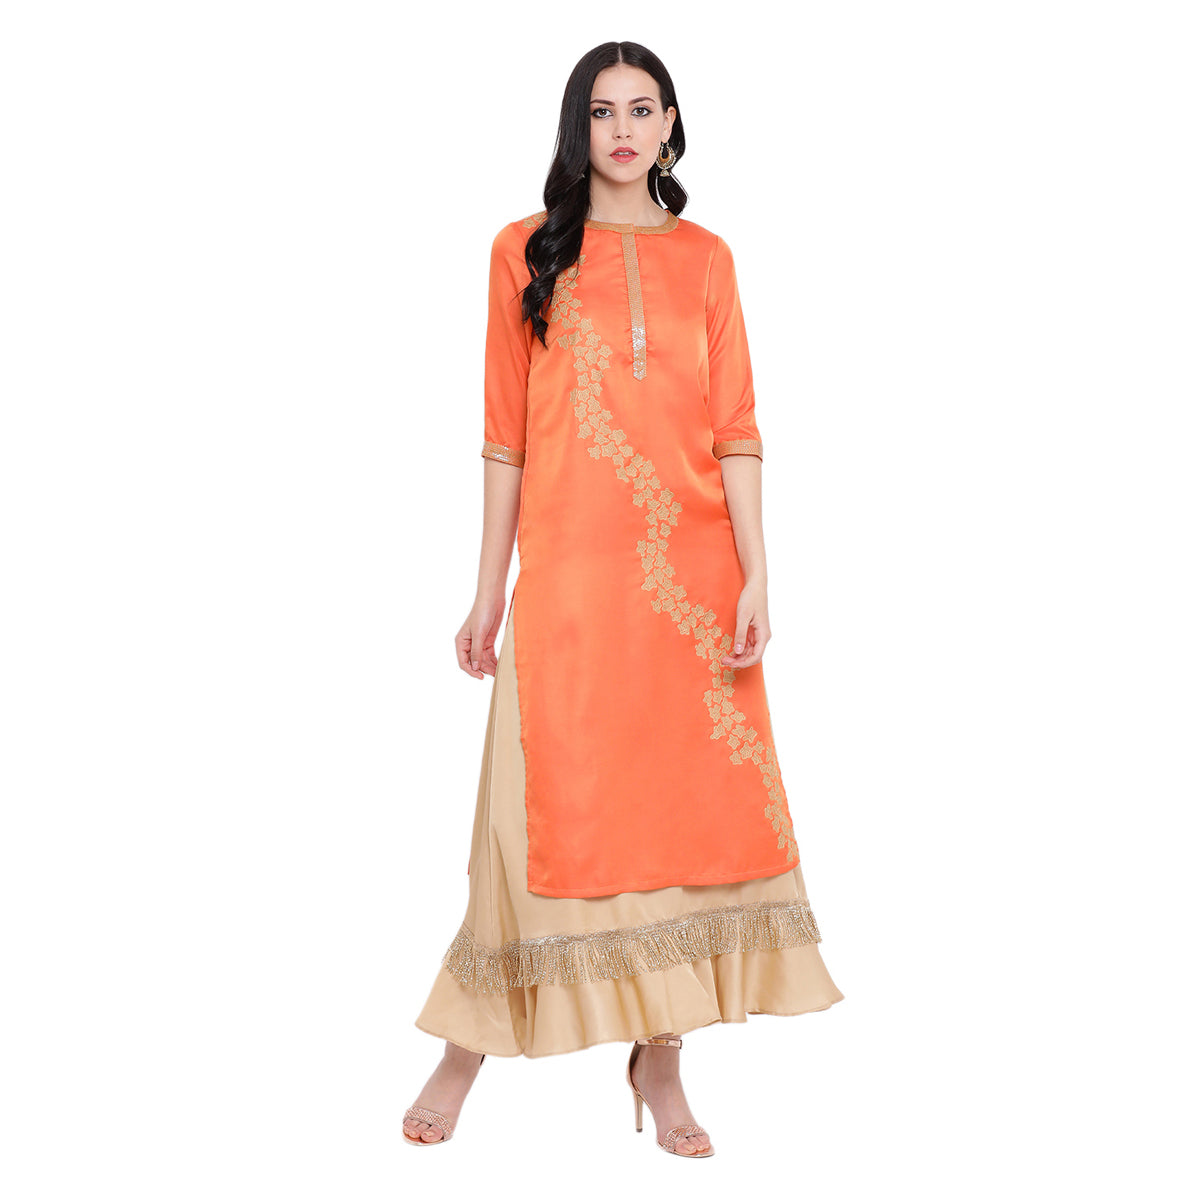 Peach kurta with abstract embroidery